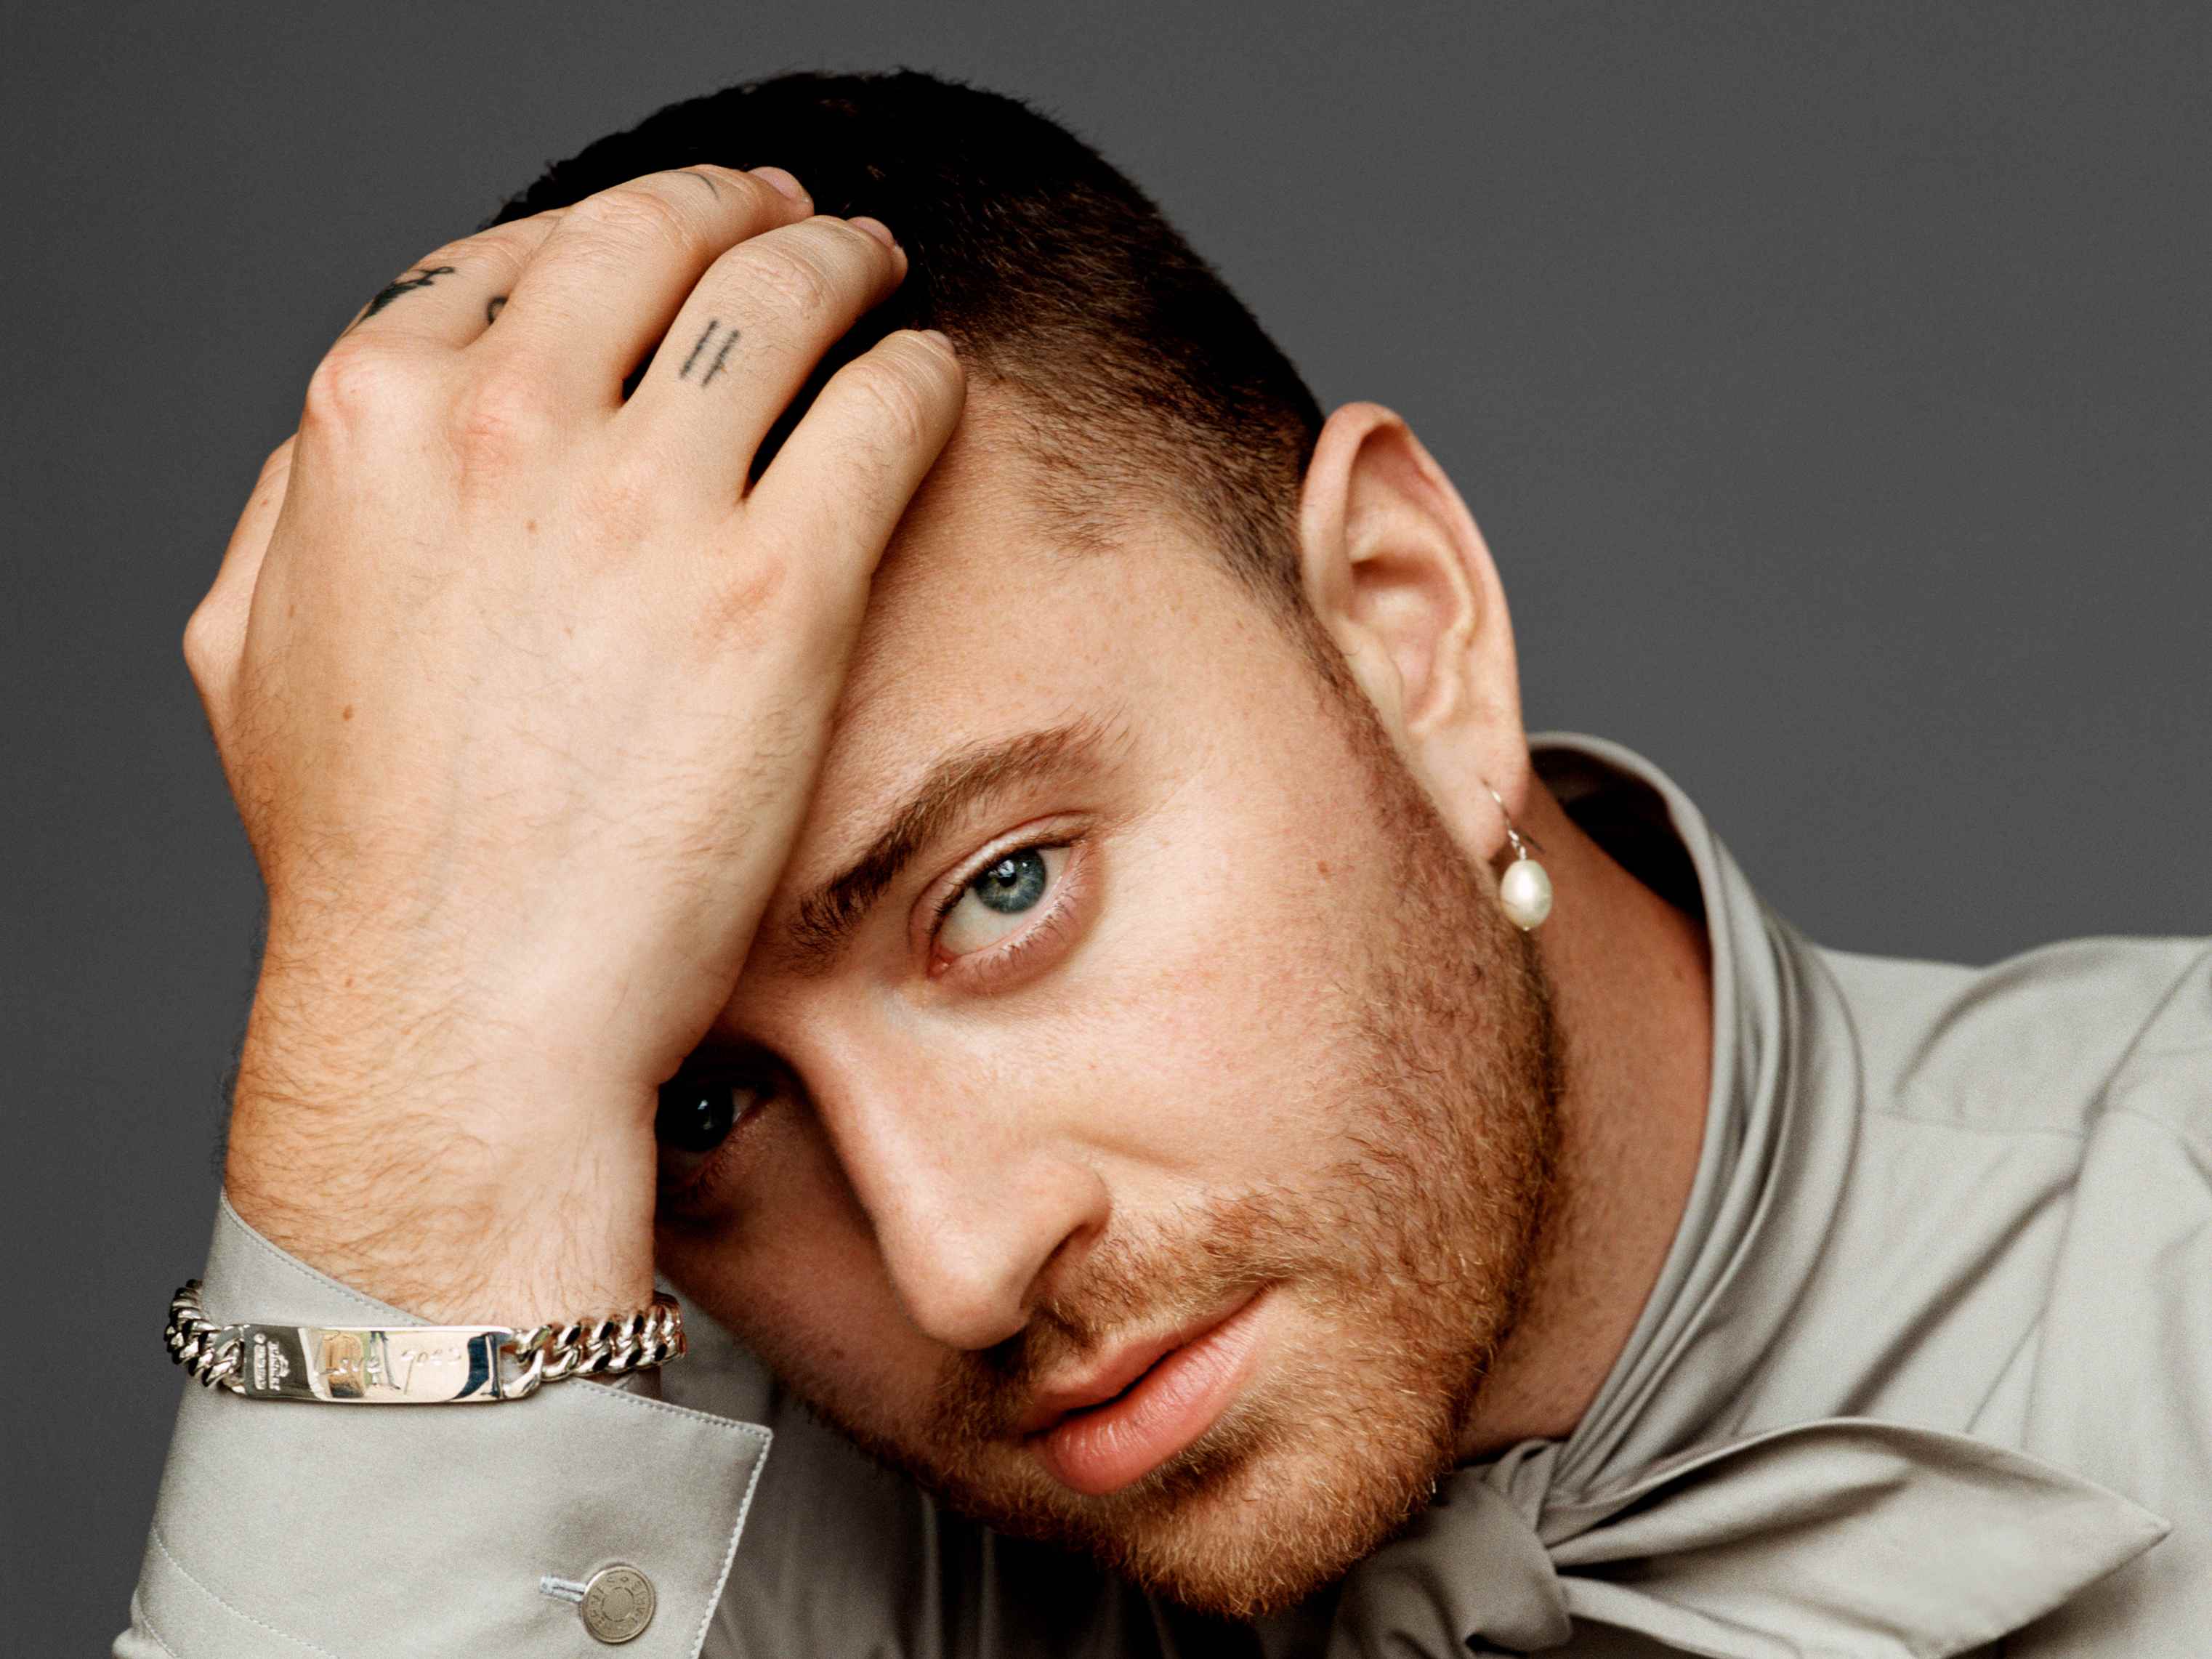 Sam Smith, Biography, Songs, & Facts